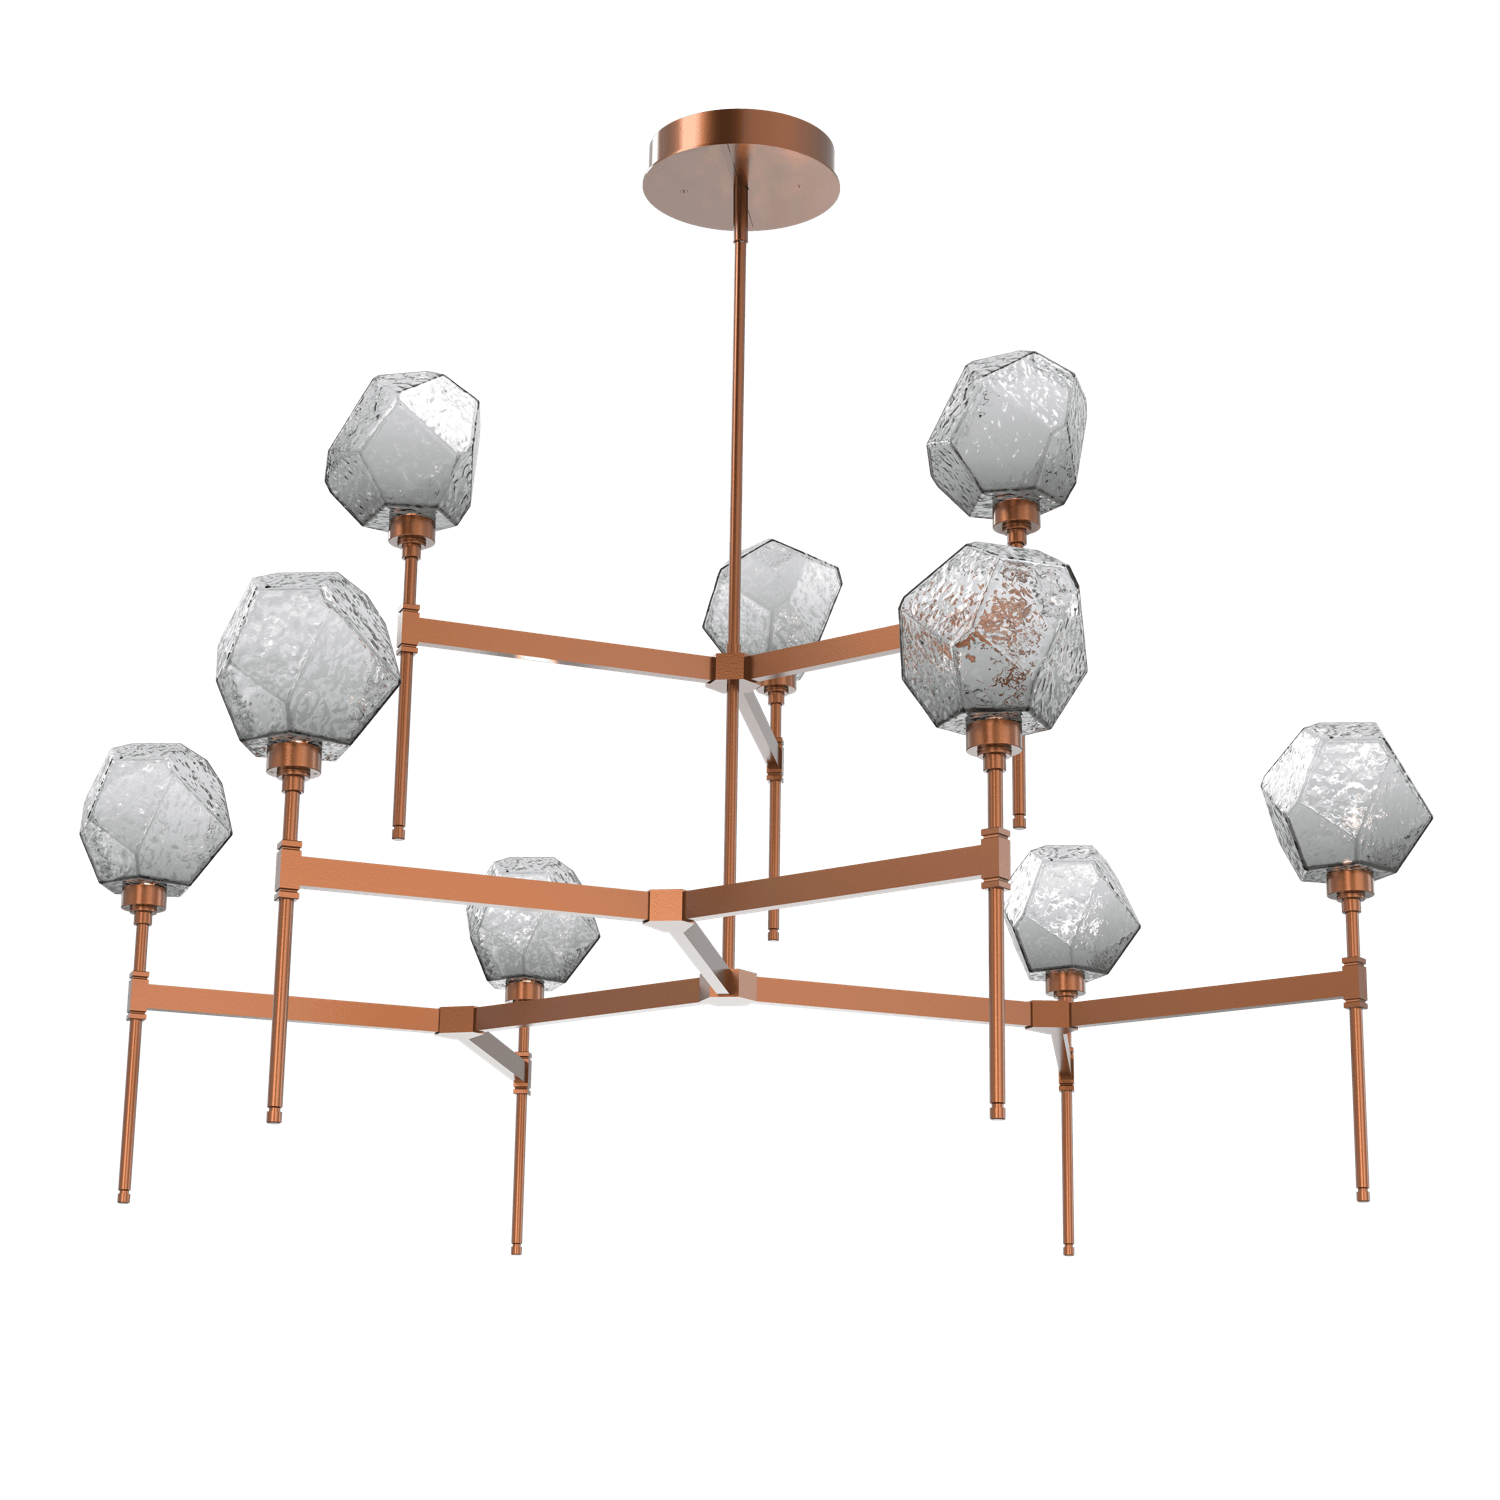 CHB0039-55-BB-S-Hammerton-Studio-Gem-round-two-tier-belvedere-chandelier-with-burnished-bronze-finish-and-smoke-blown-glass-shades-and-LED-lamping